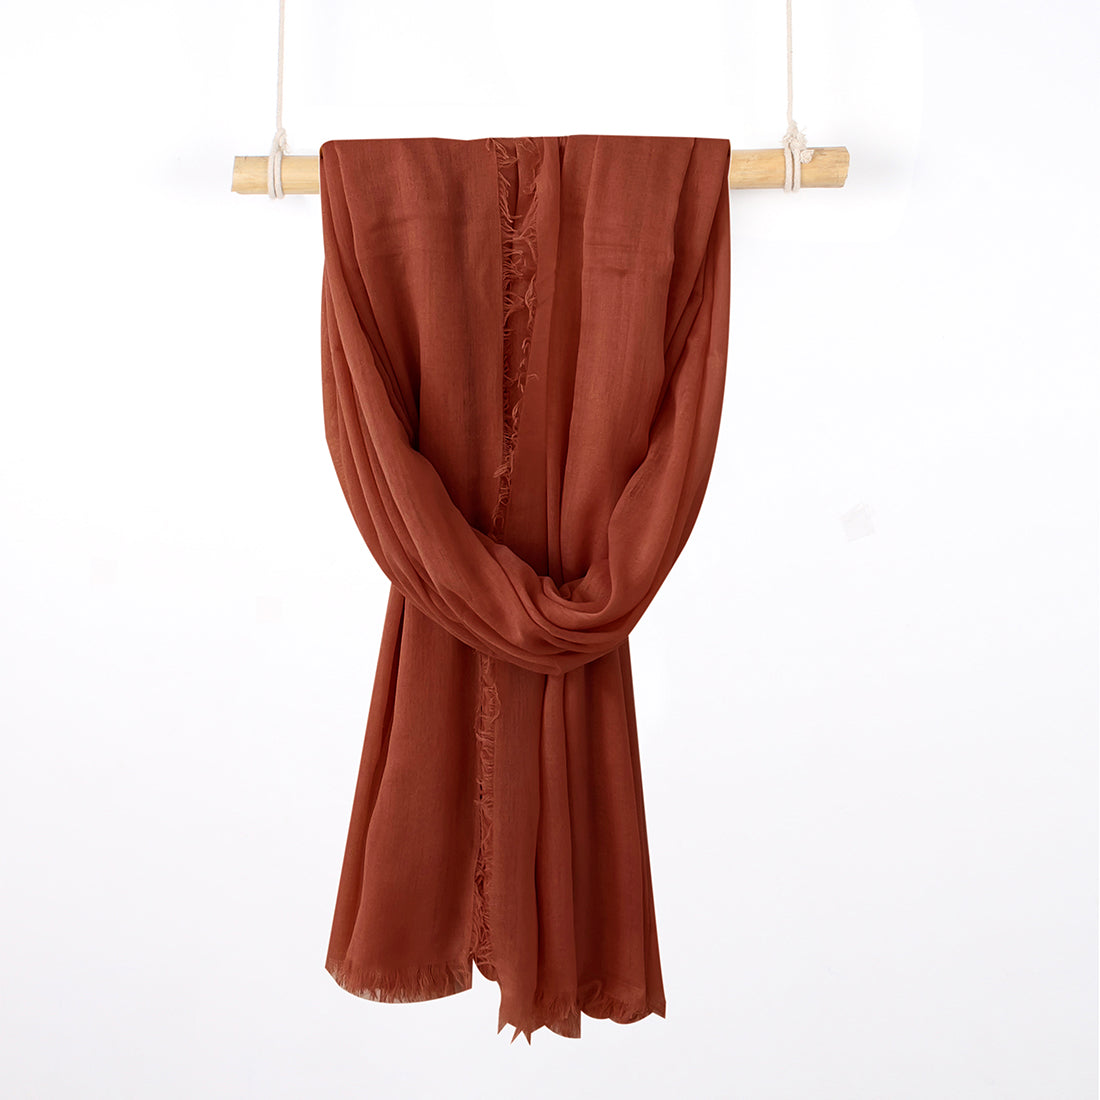 CONTEMPORARY SOLID BROWN SOFT POLYESTER SCARF